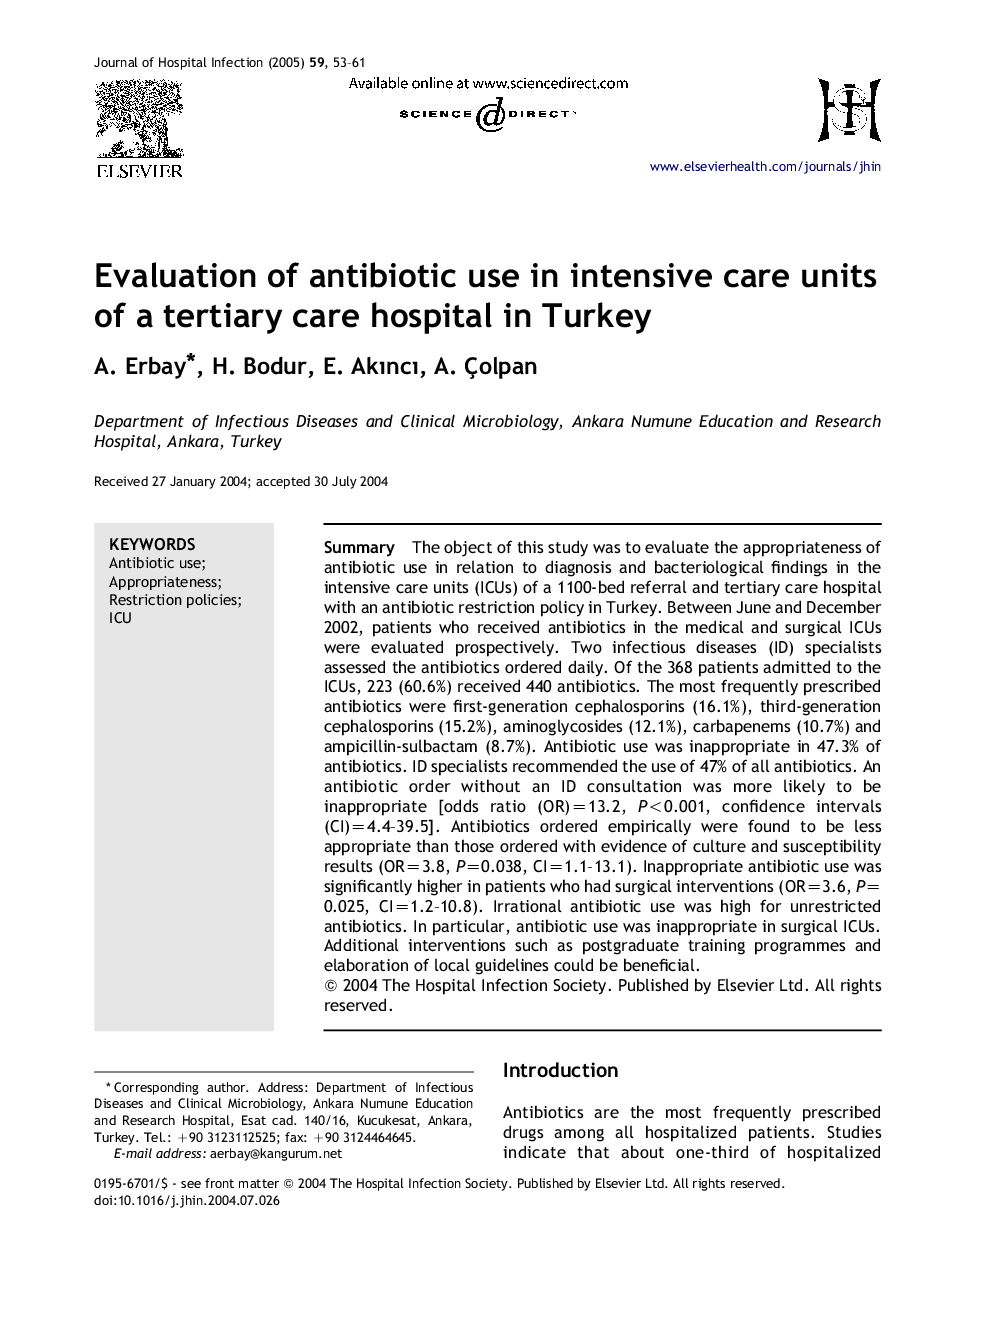 Evaluation of antibiotic use in intensive care units of a tertiary care hospital in Turkey